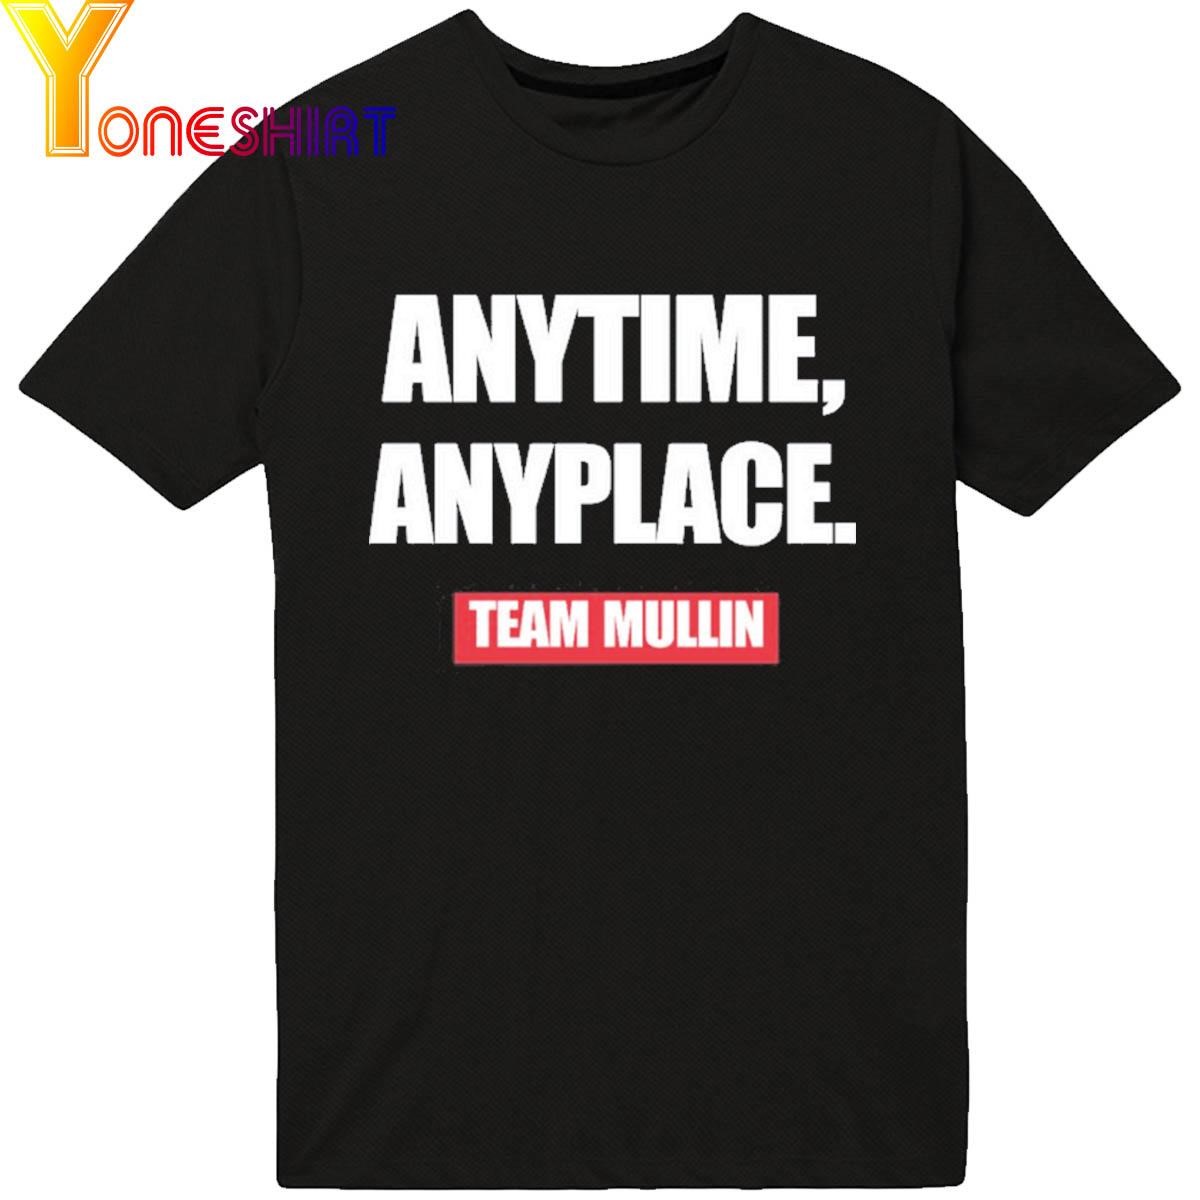 Anytime Anyplace Team Mullin shirt